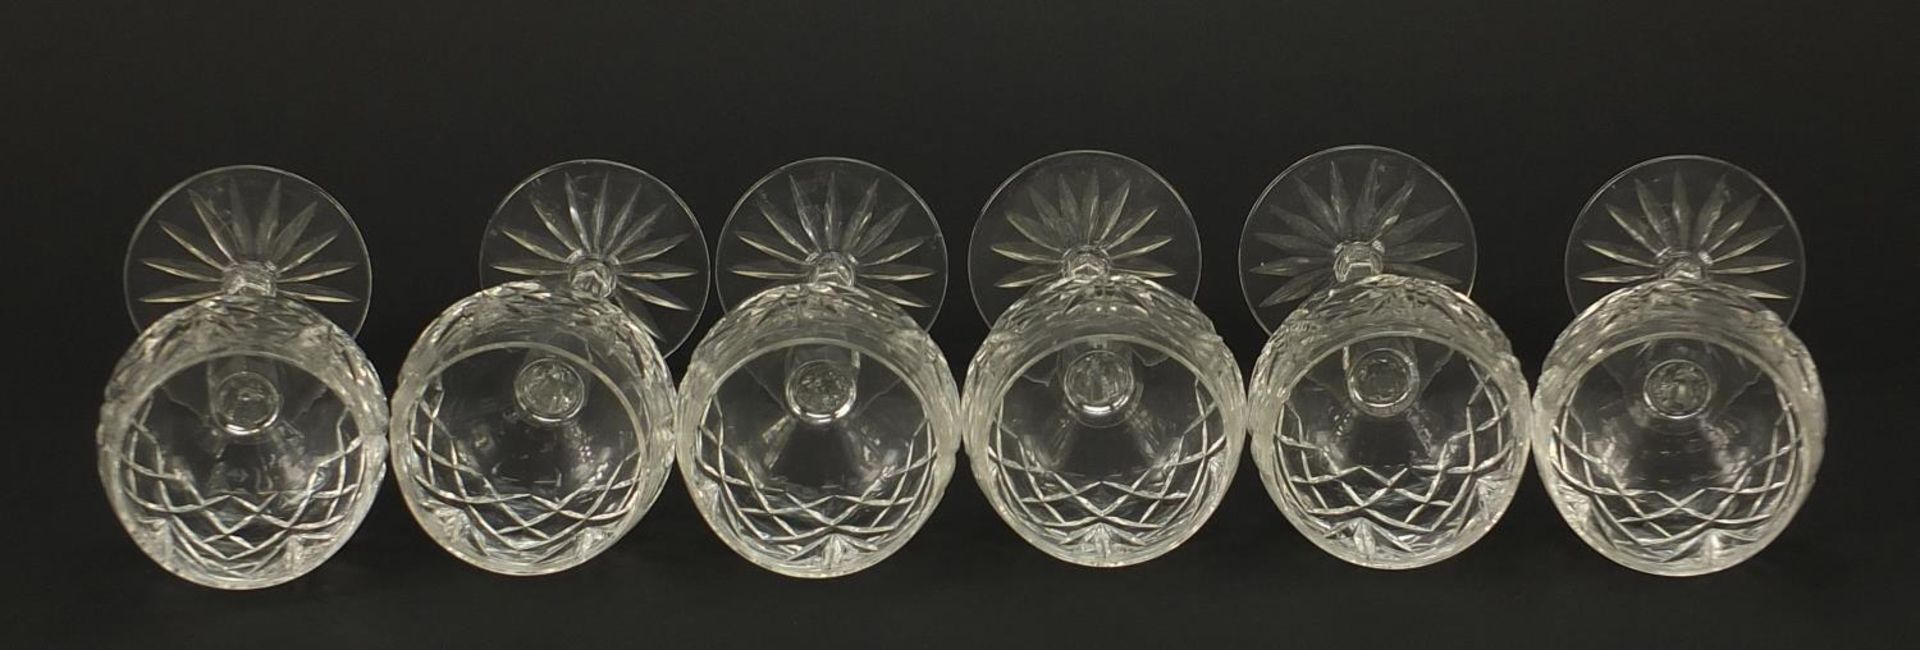 Set of six cut glass wine goblets, each 18.5cm high - Image 5 of 6